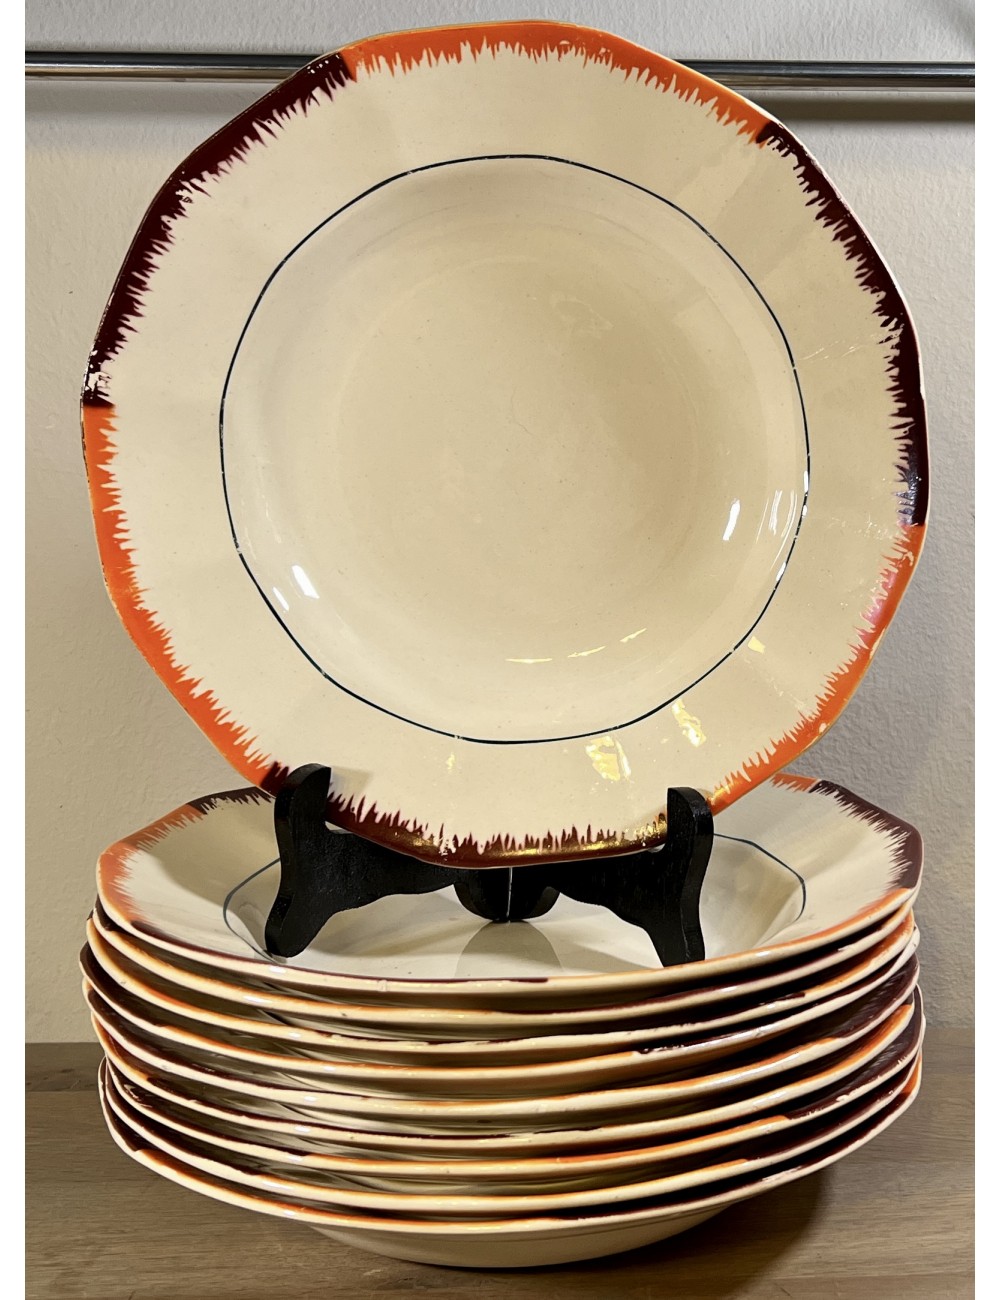 Deep plate / Soup plate / Pasta plate - unmarked - décor in brown with orange on the edges - Art Deco